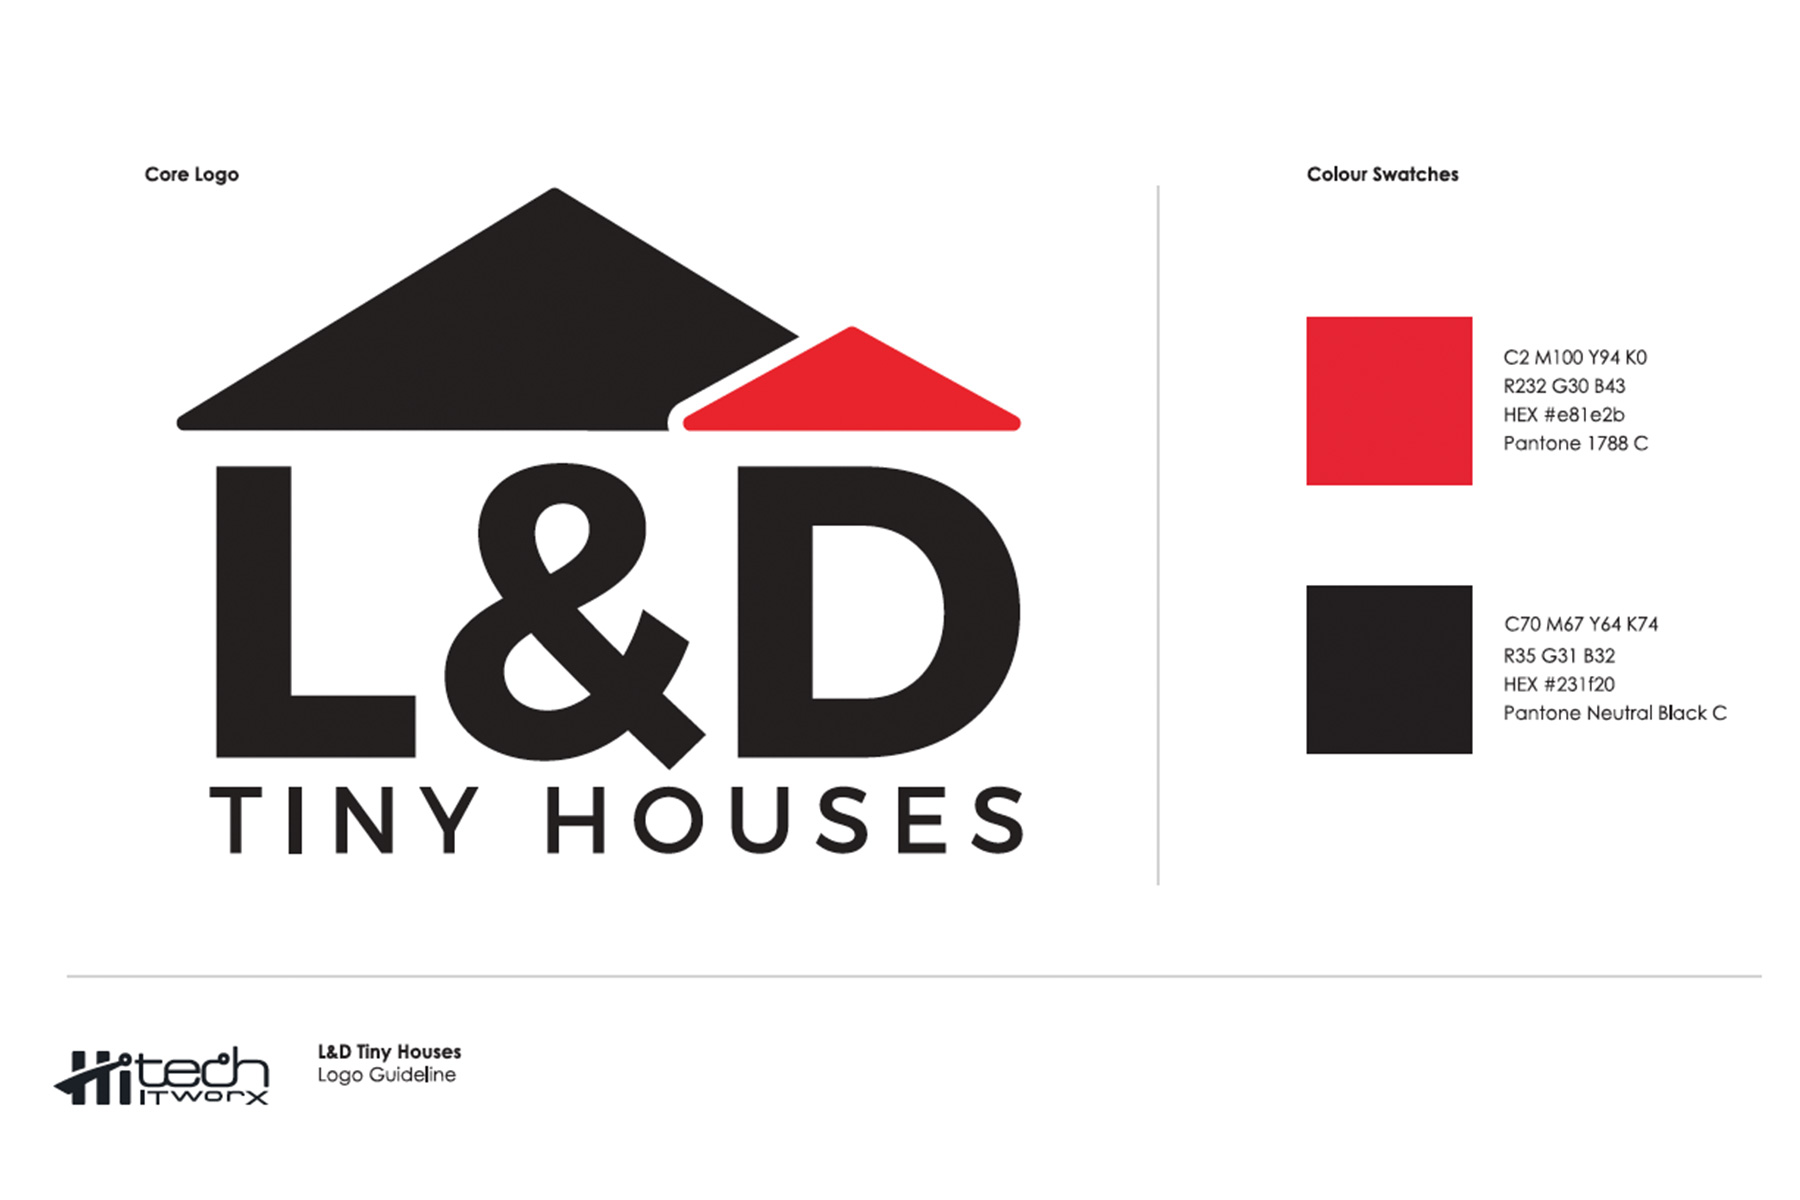 L&D Tiny Houses logo guidelines